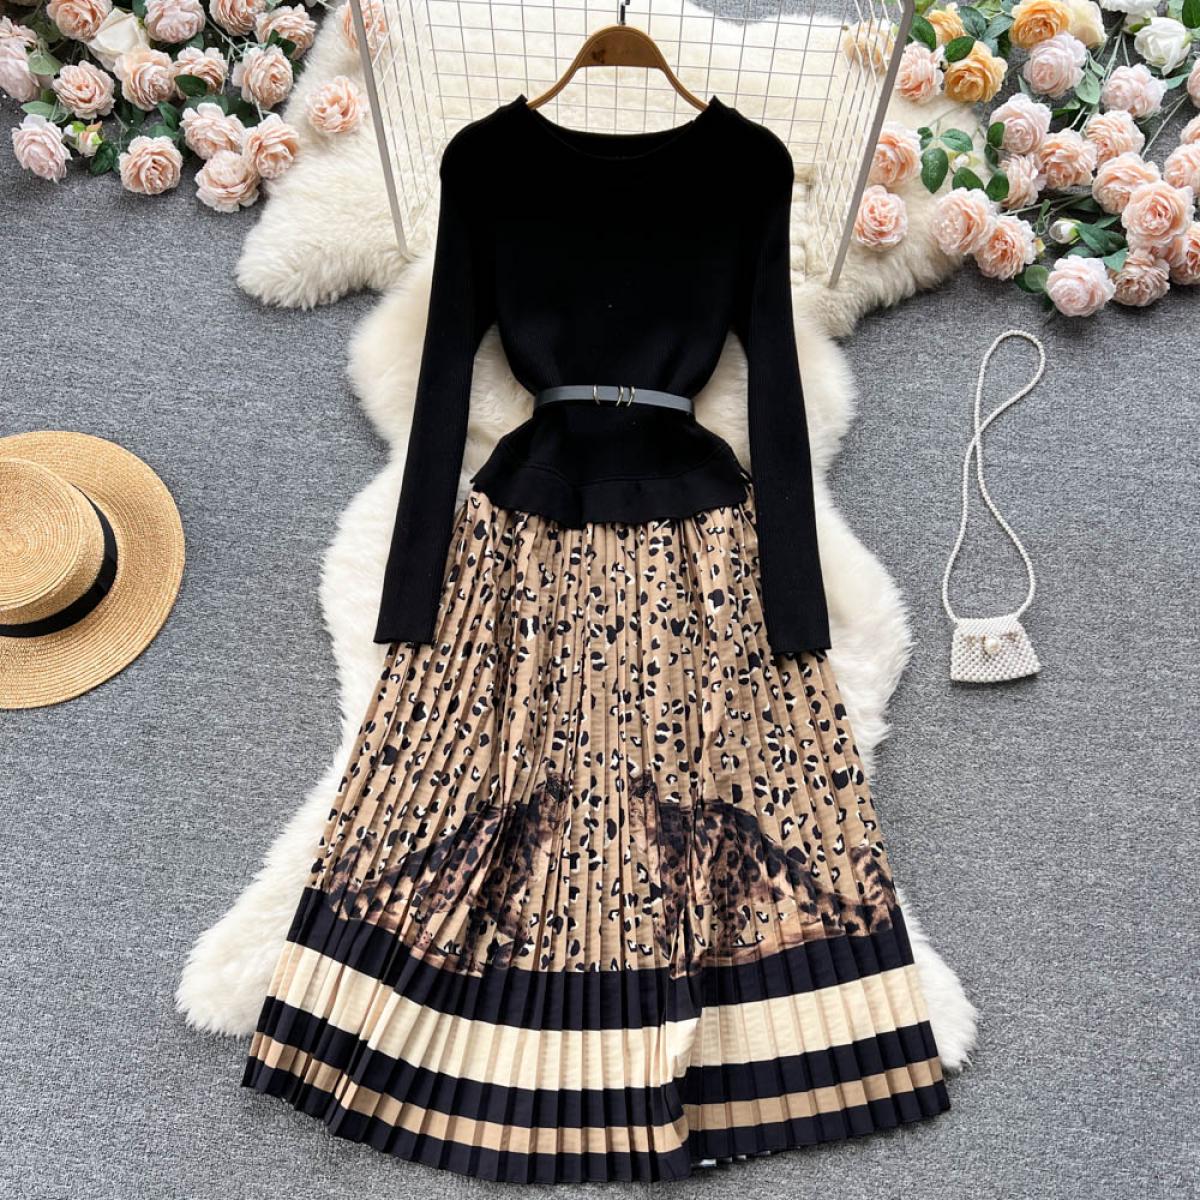 Spring Elegant Black Maxi Dresses For Women Knitted Patchwork Slim Female Vestido With Pleated Skirt Office Lady Party N